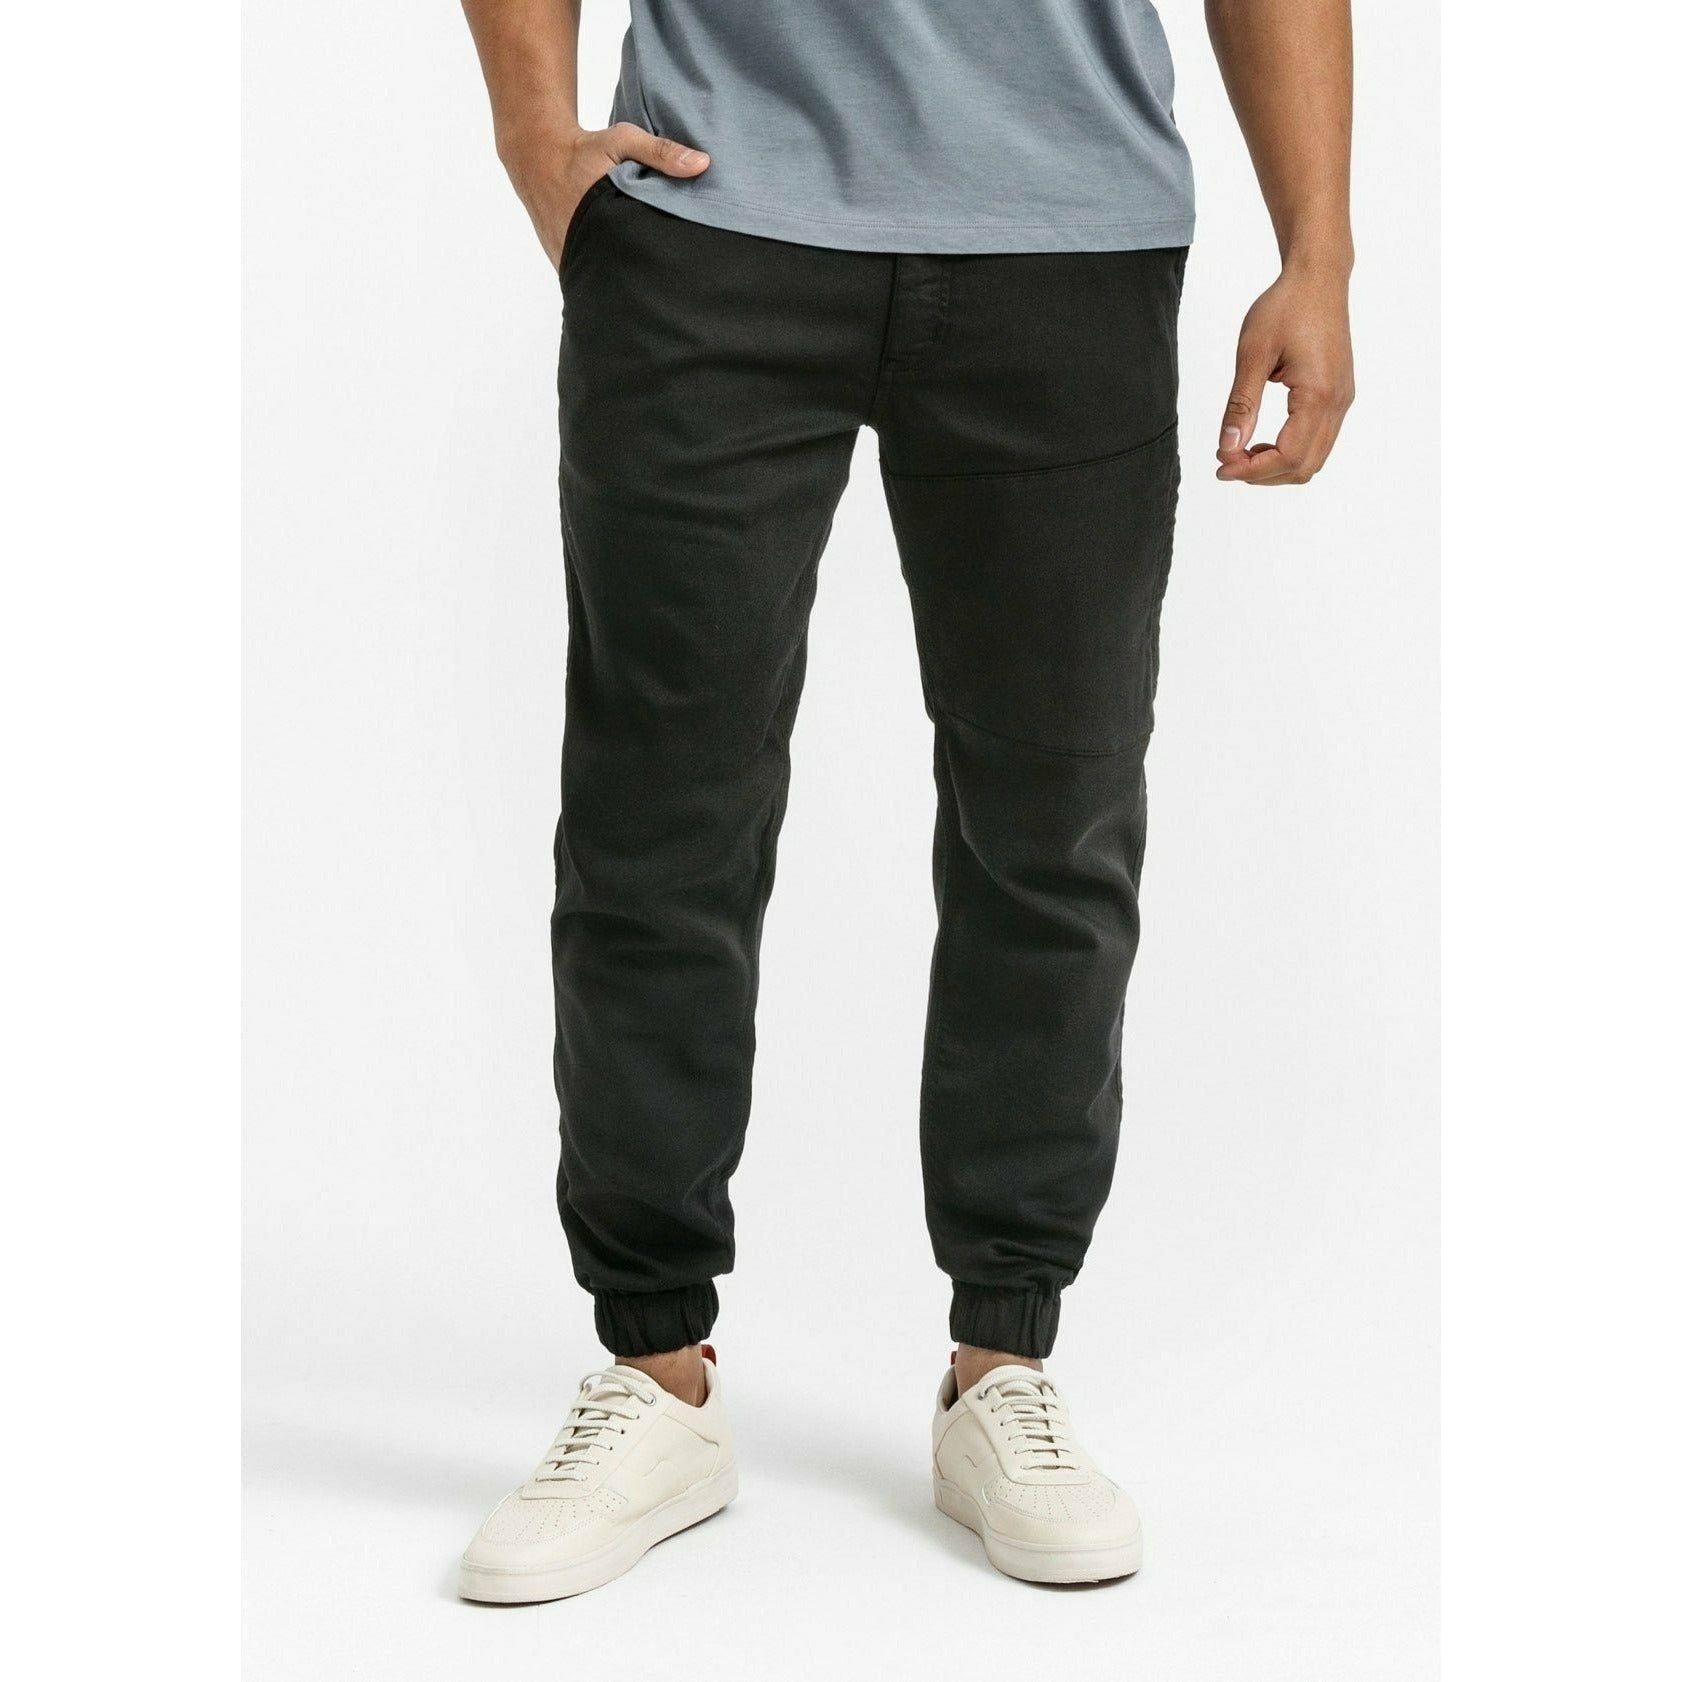 No Sweat Jogger for Men's – Olodge